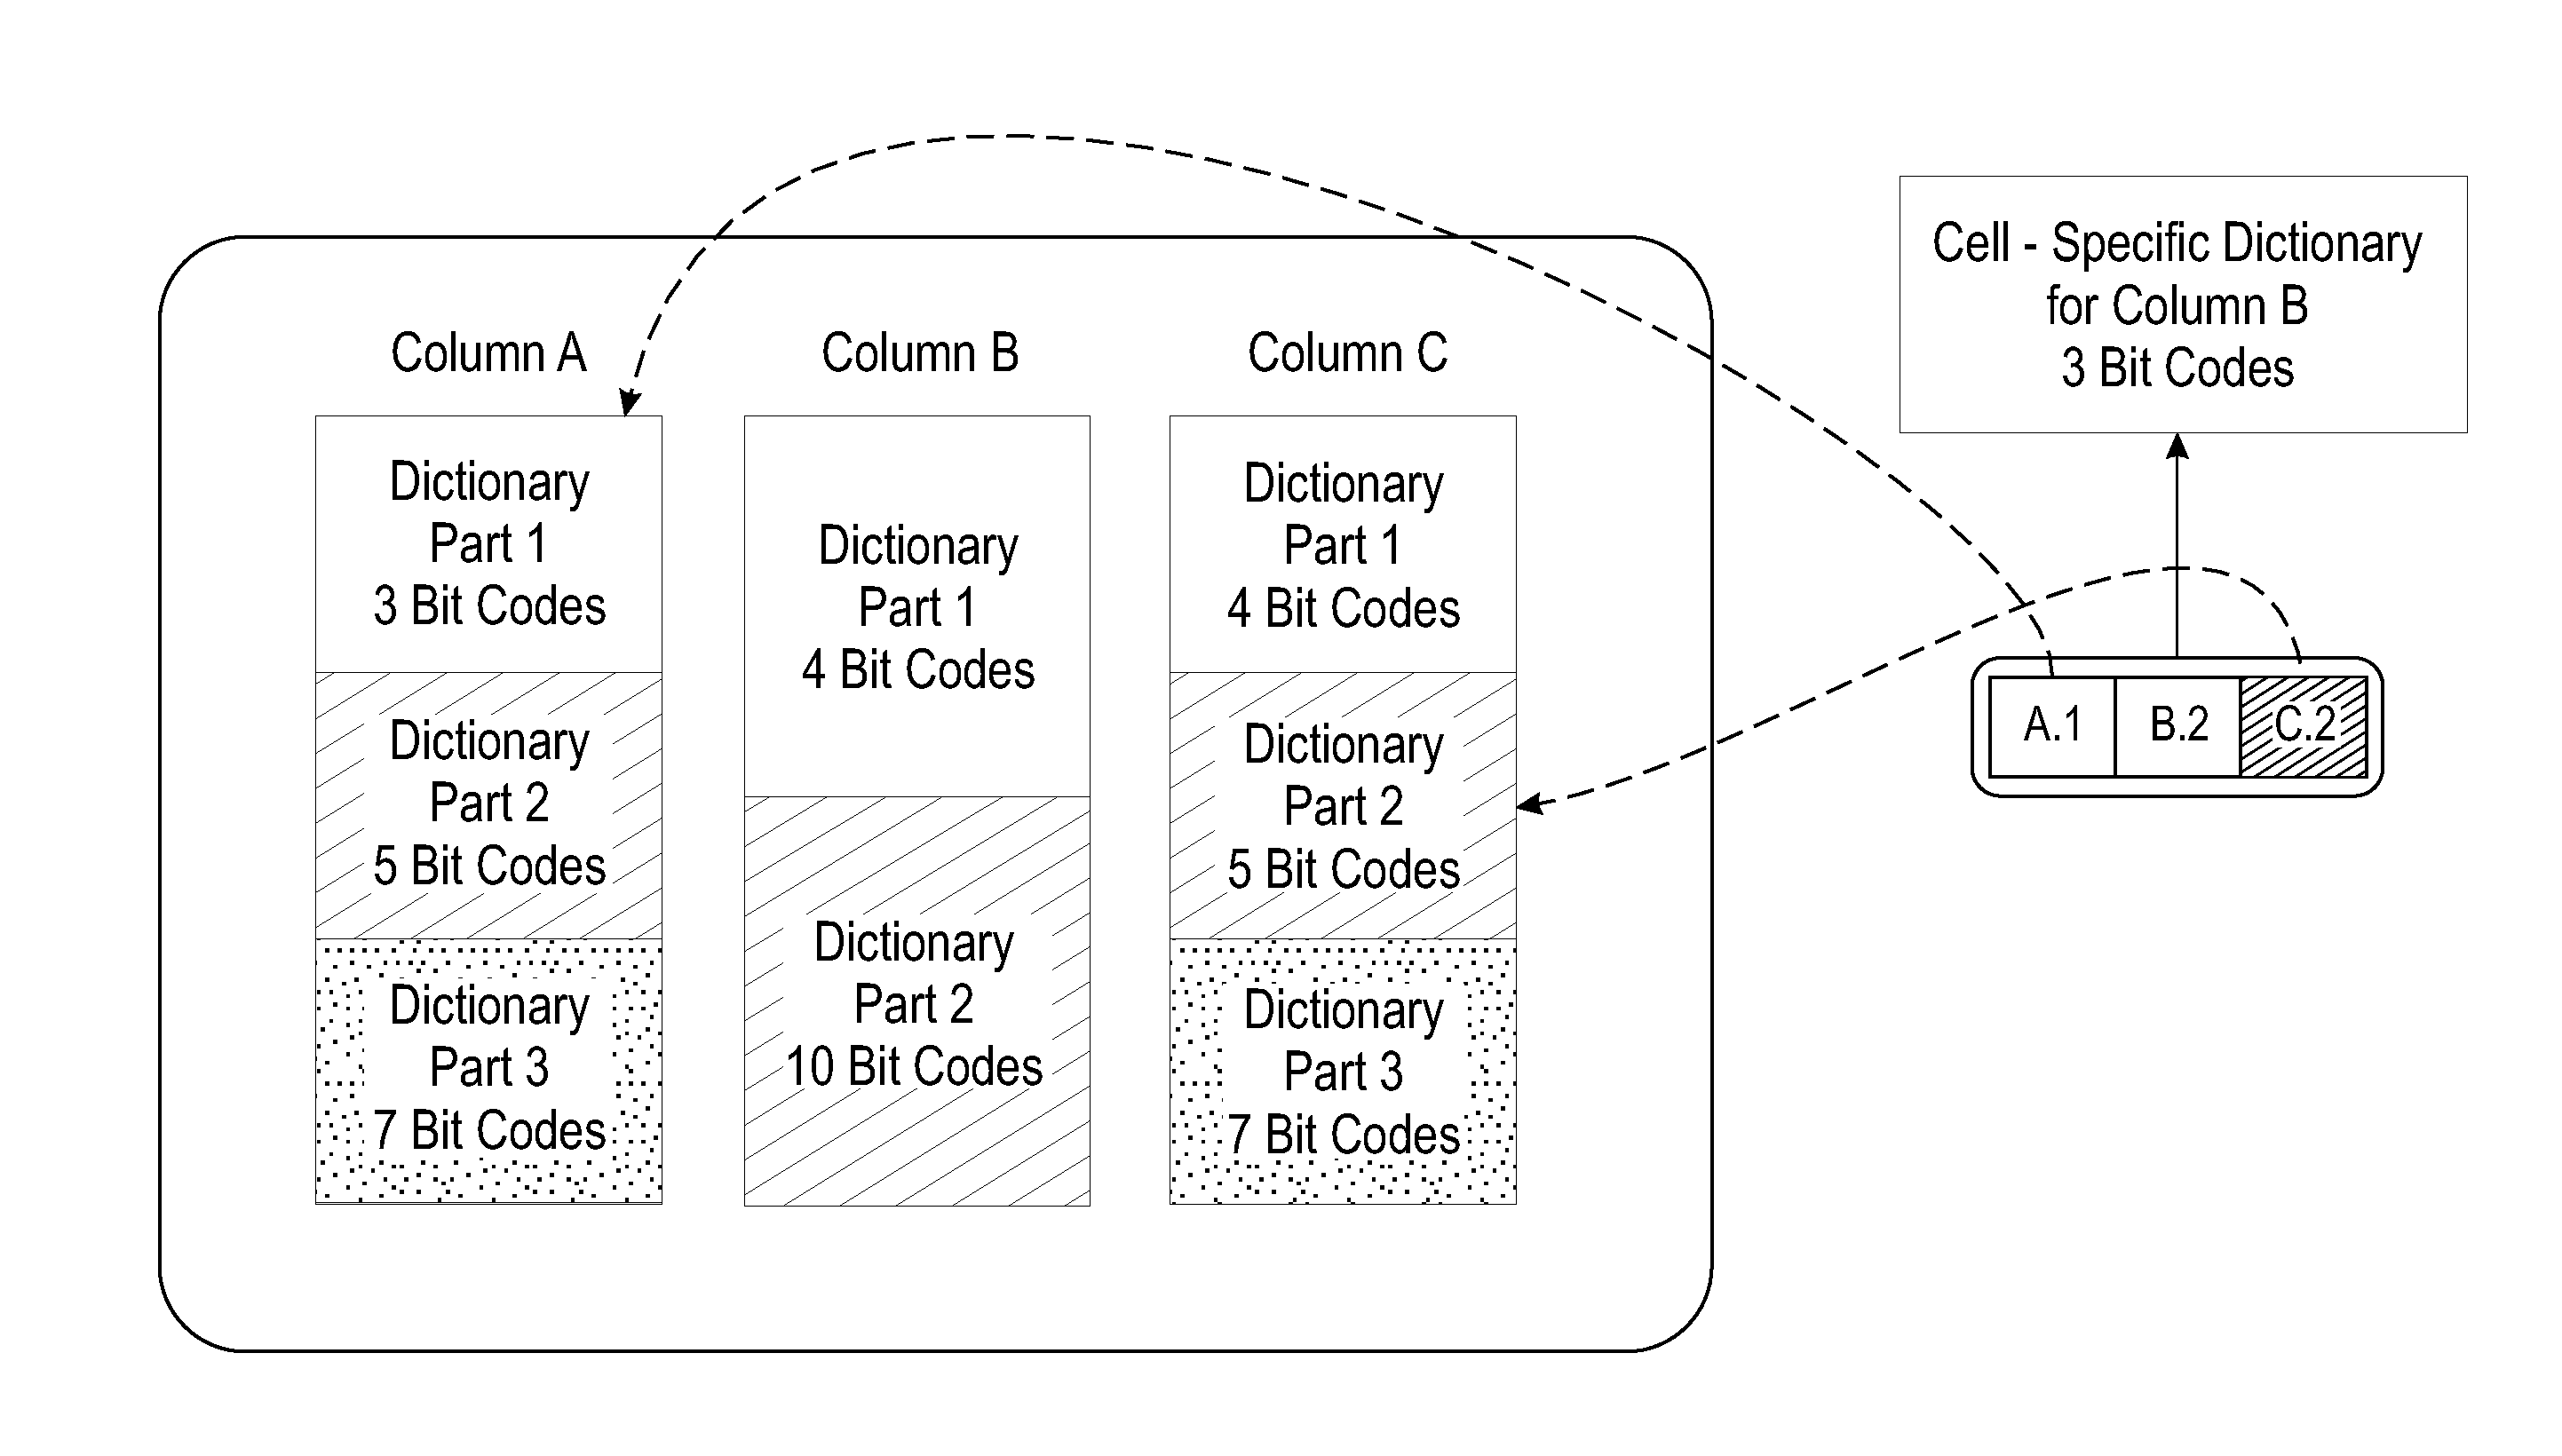 Adaptive cell-specific dictionaries for frequency-partitioned multi-dimensional data